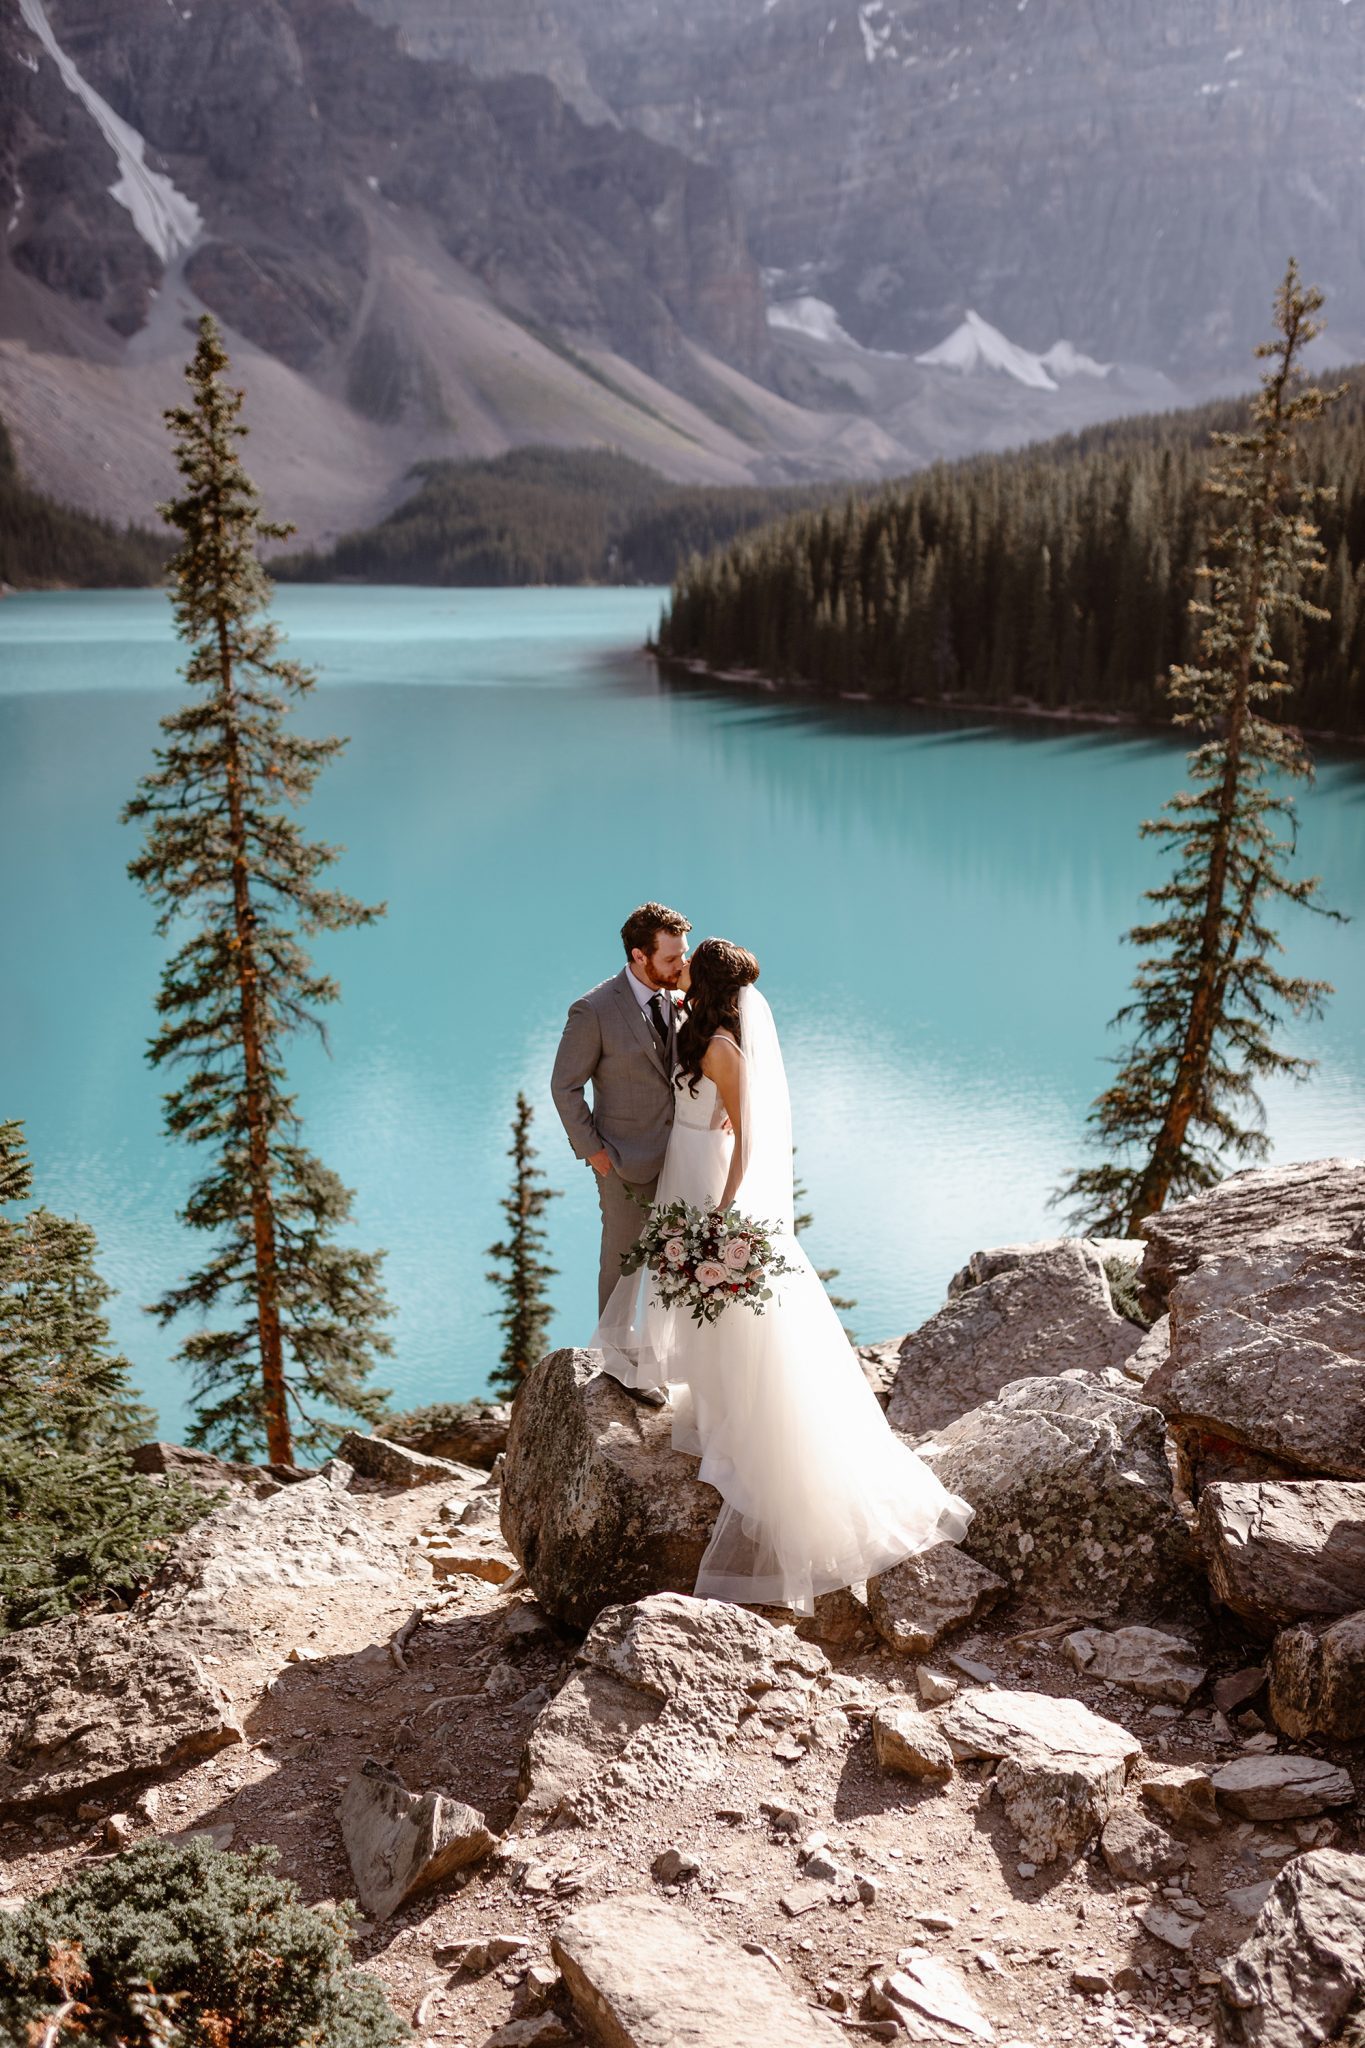 Downsized Covid 19 wedding in the Rocky Mountains - moraine lake, rocky mountain wedding, bridal style